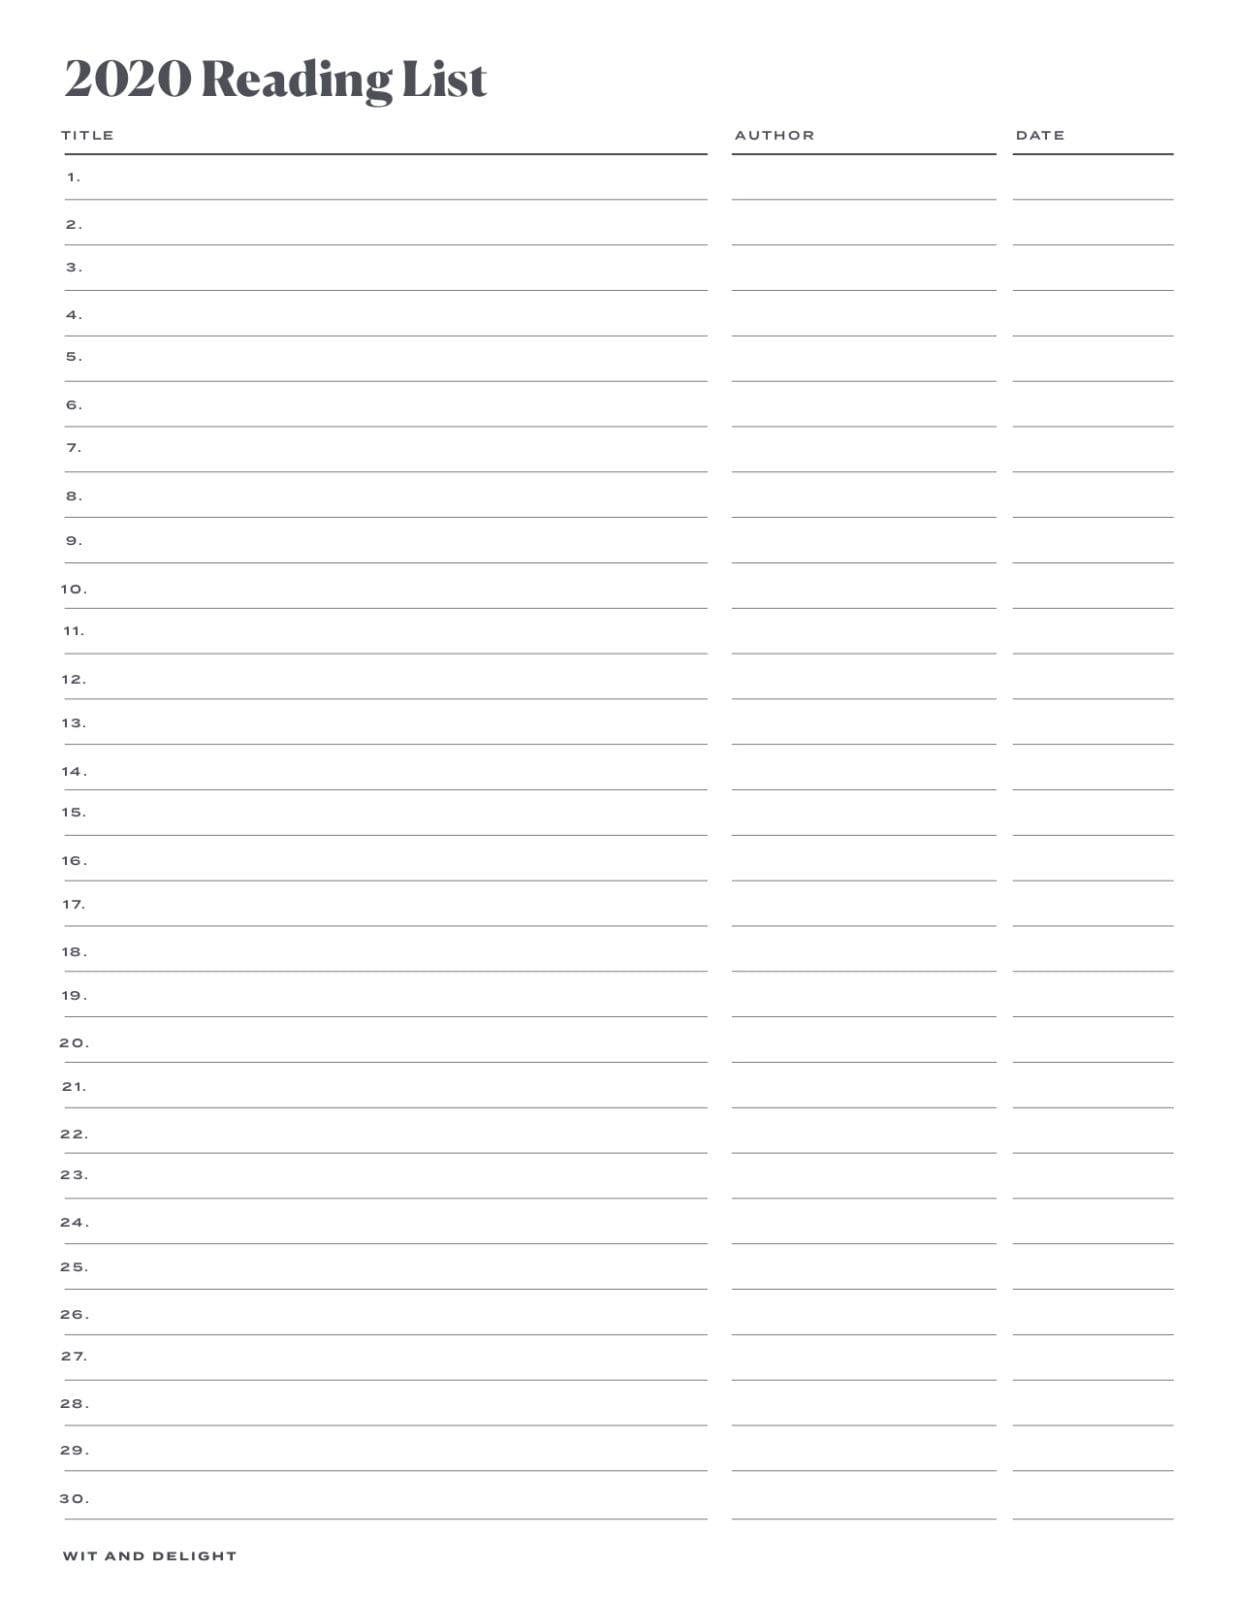 Book Reading Schedule Template from witanddelight.com